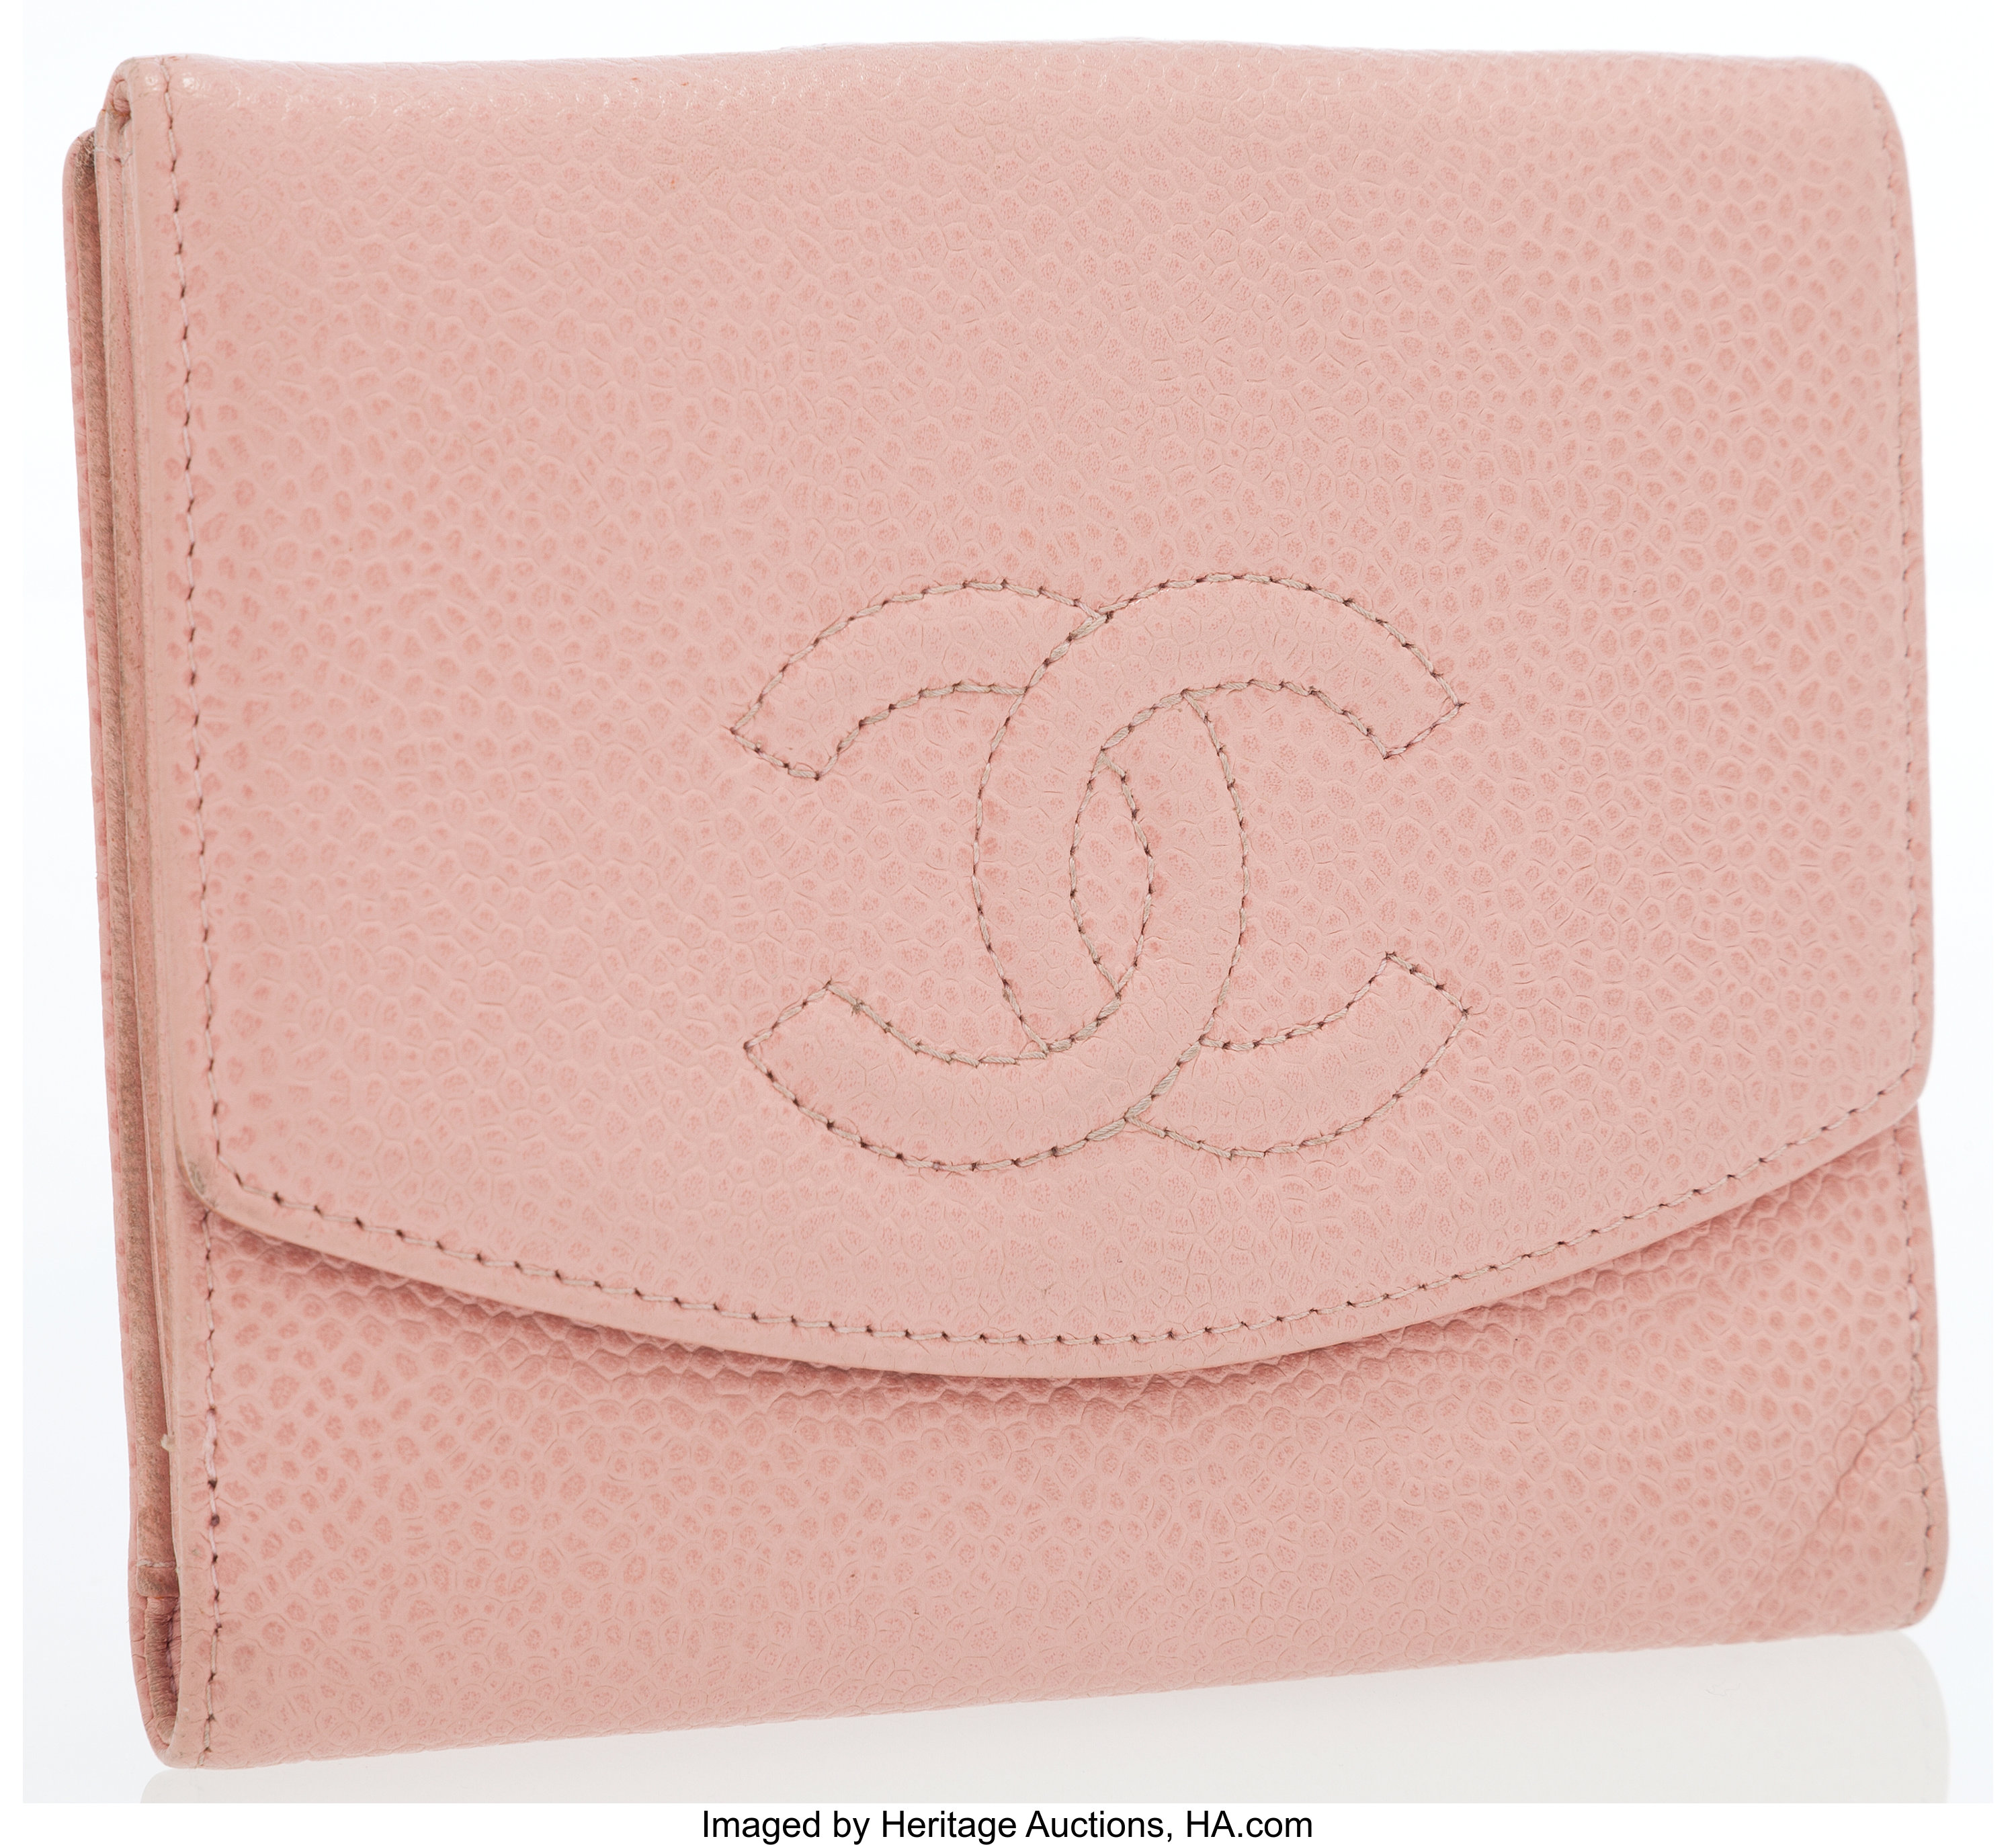 Chanel Light Pink Caviar Leather CC Bifold Long Wallet Chanel